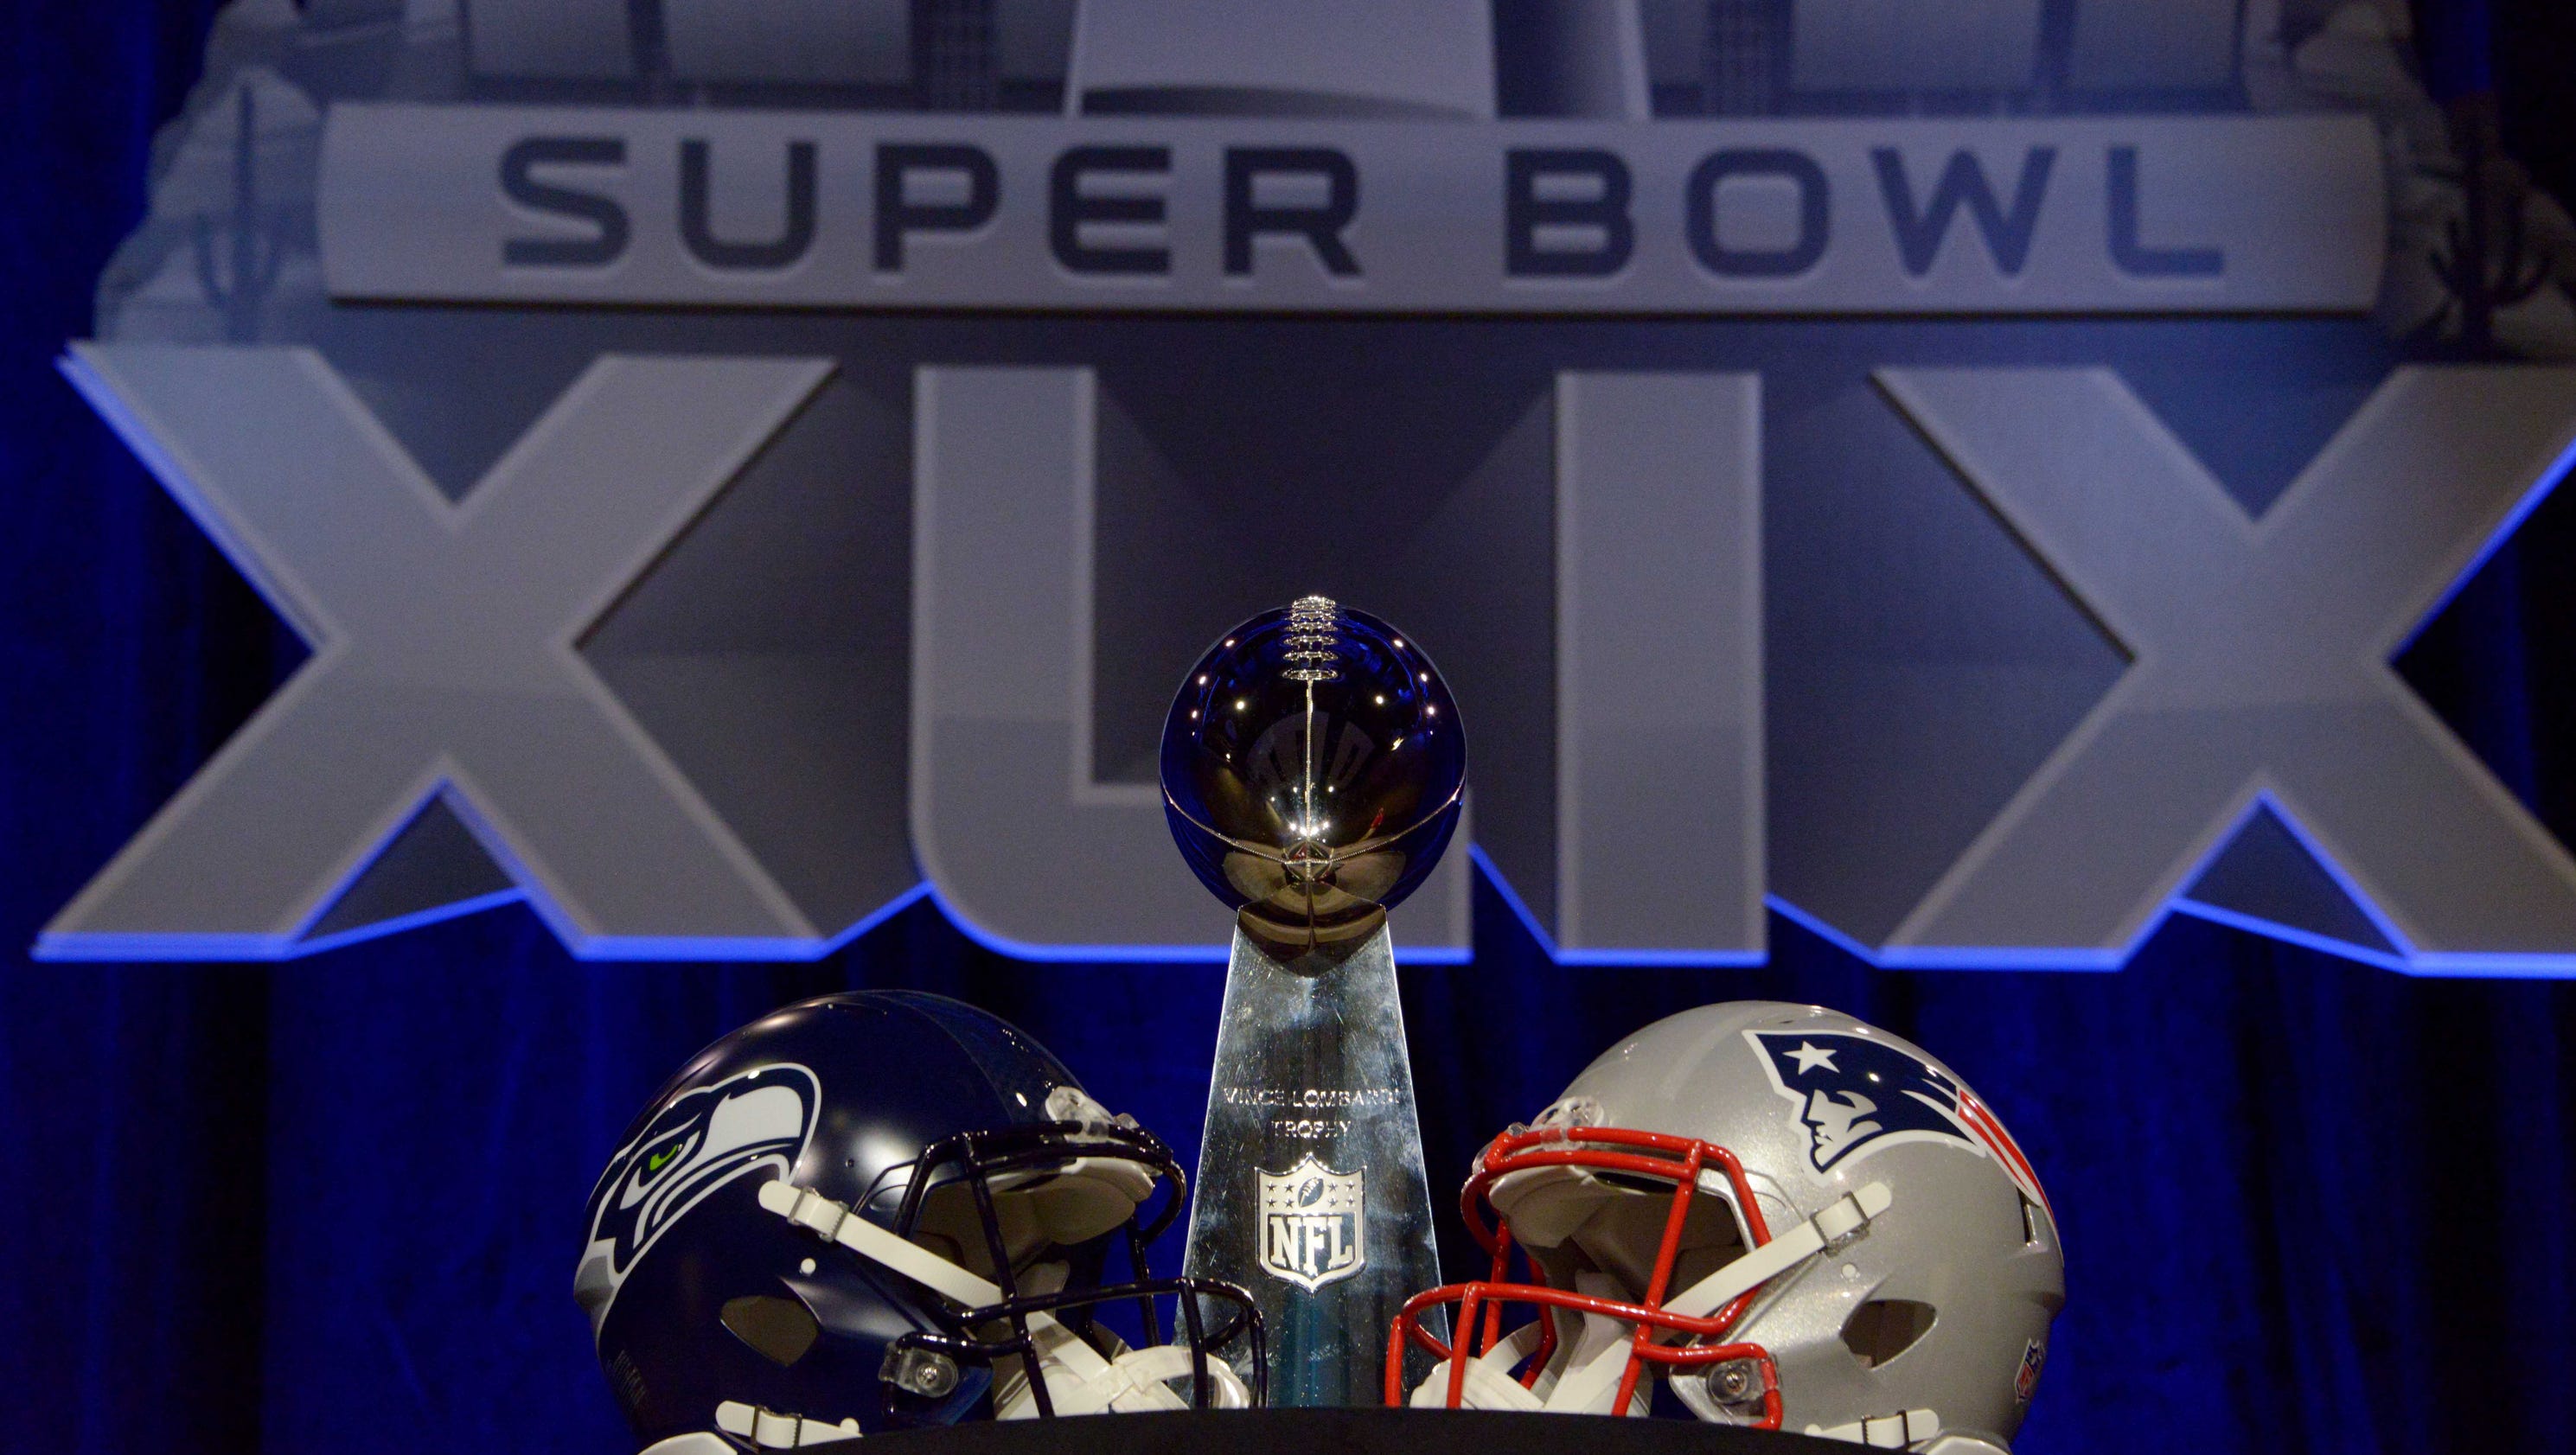 What's going on this week at Super Bowl XLIX?